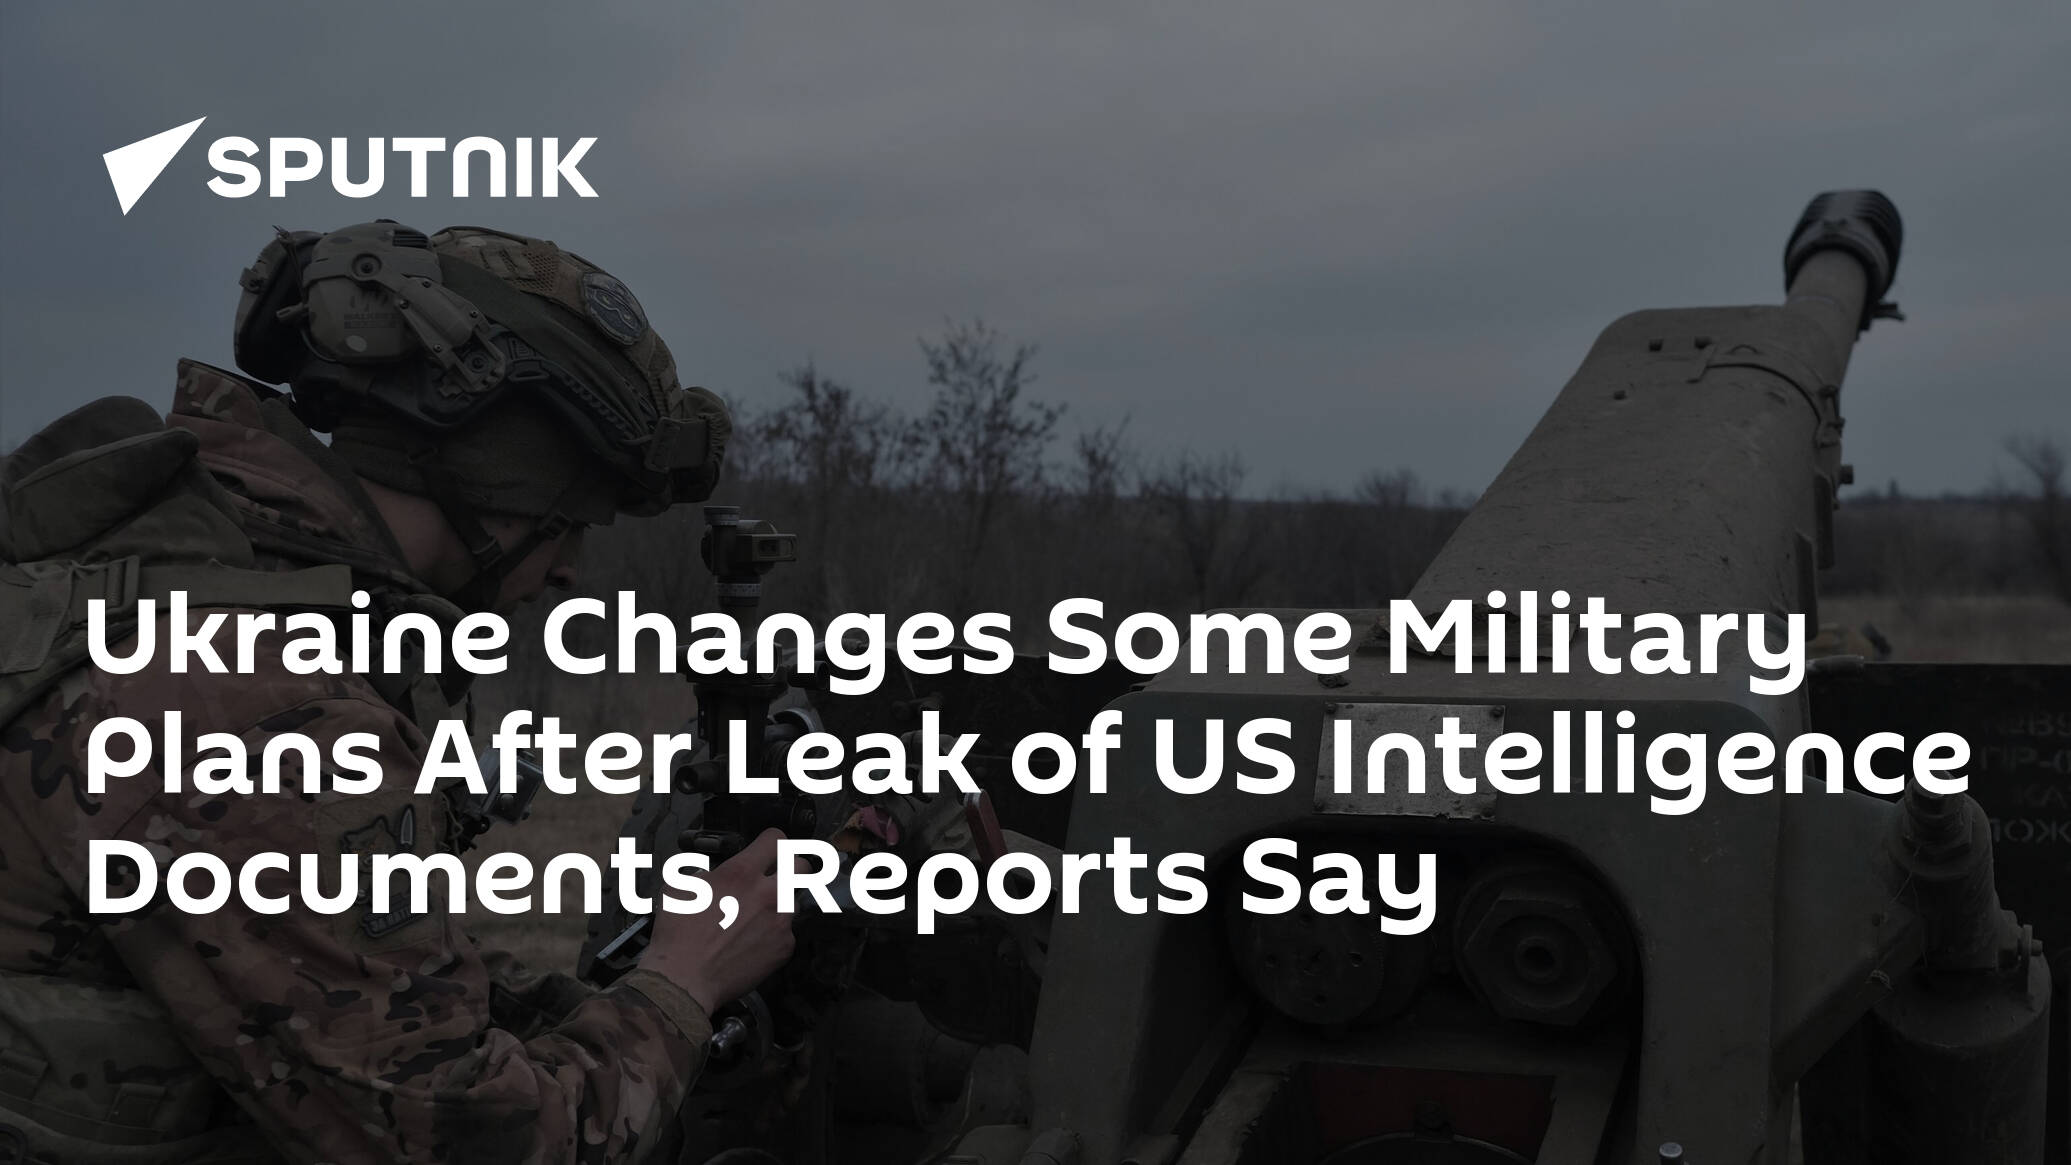 Ukraine Changes Some Military Plans After Leak of US Intelligence Documents, Reports Say